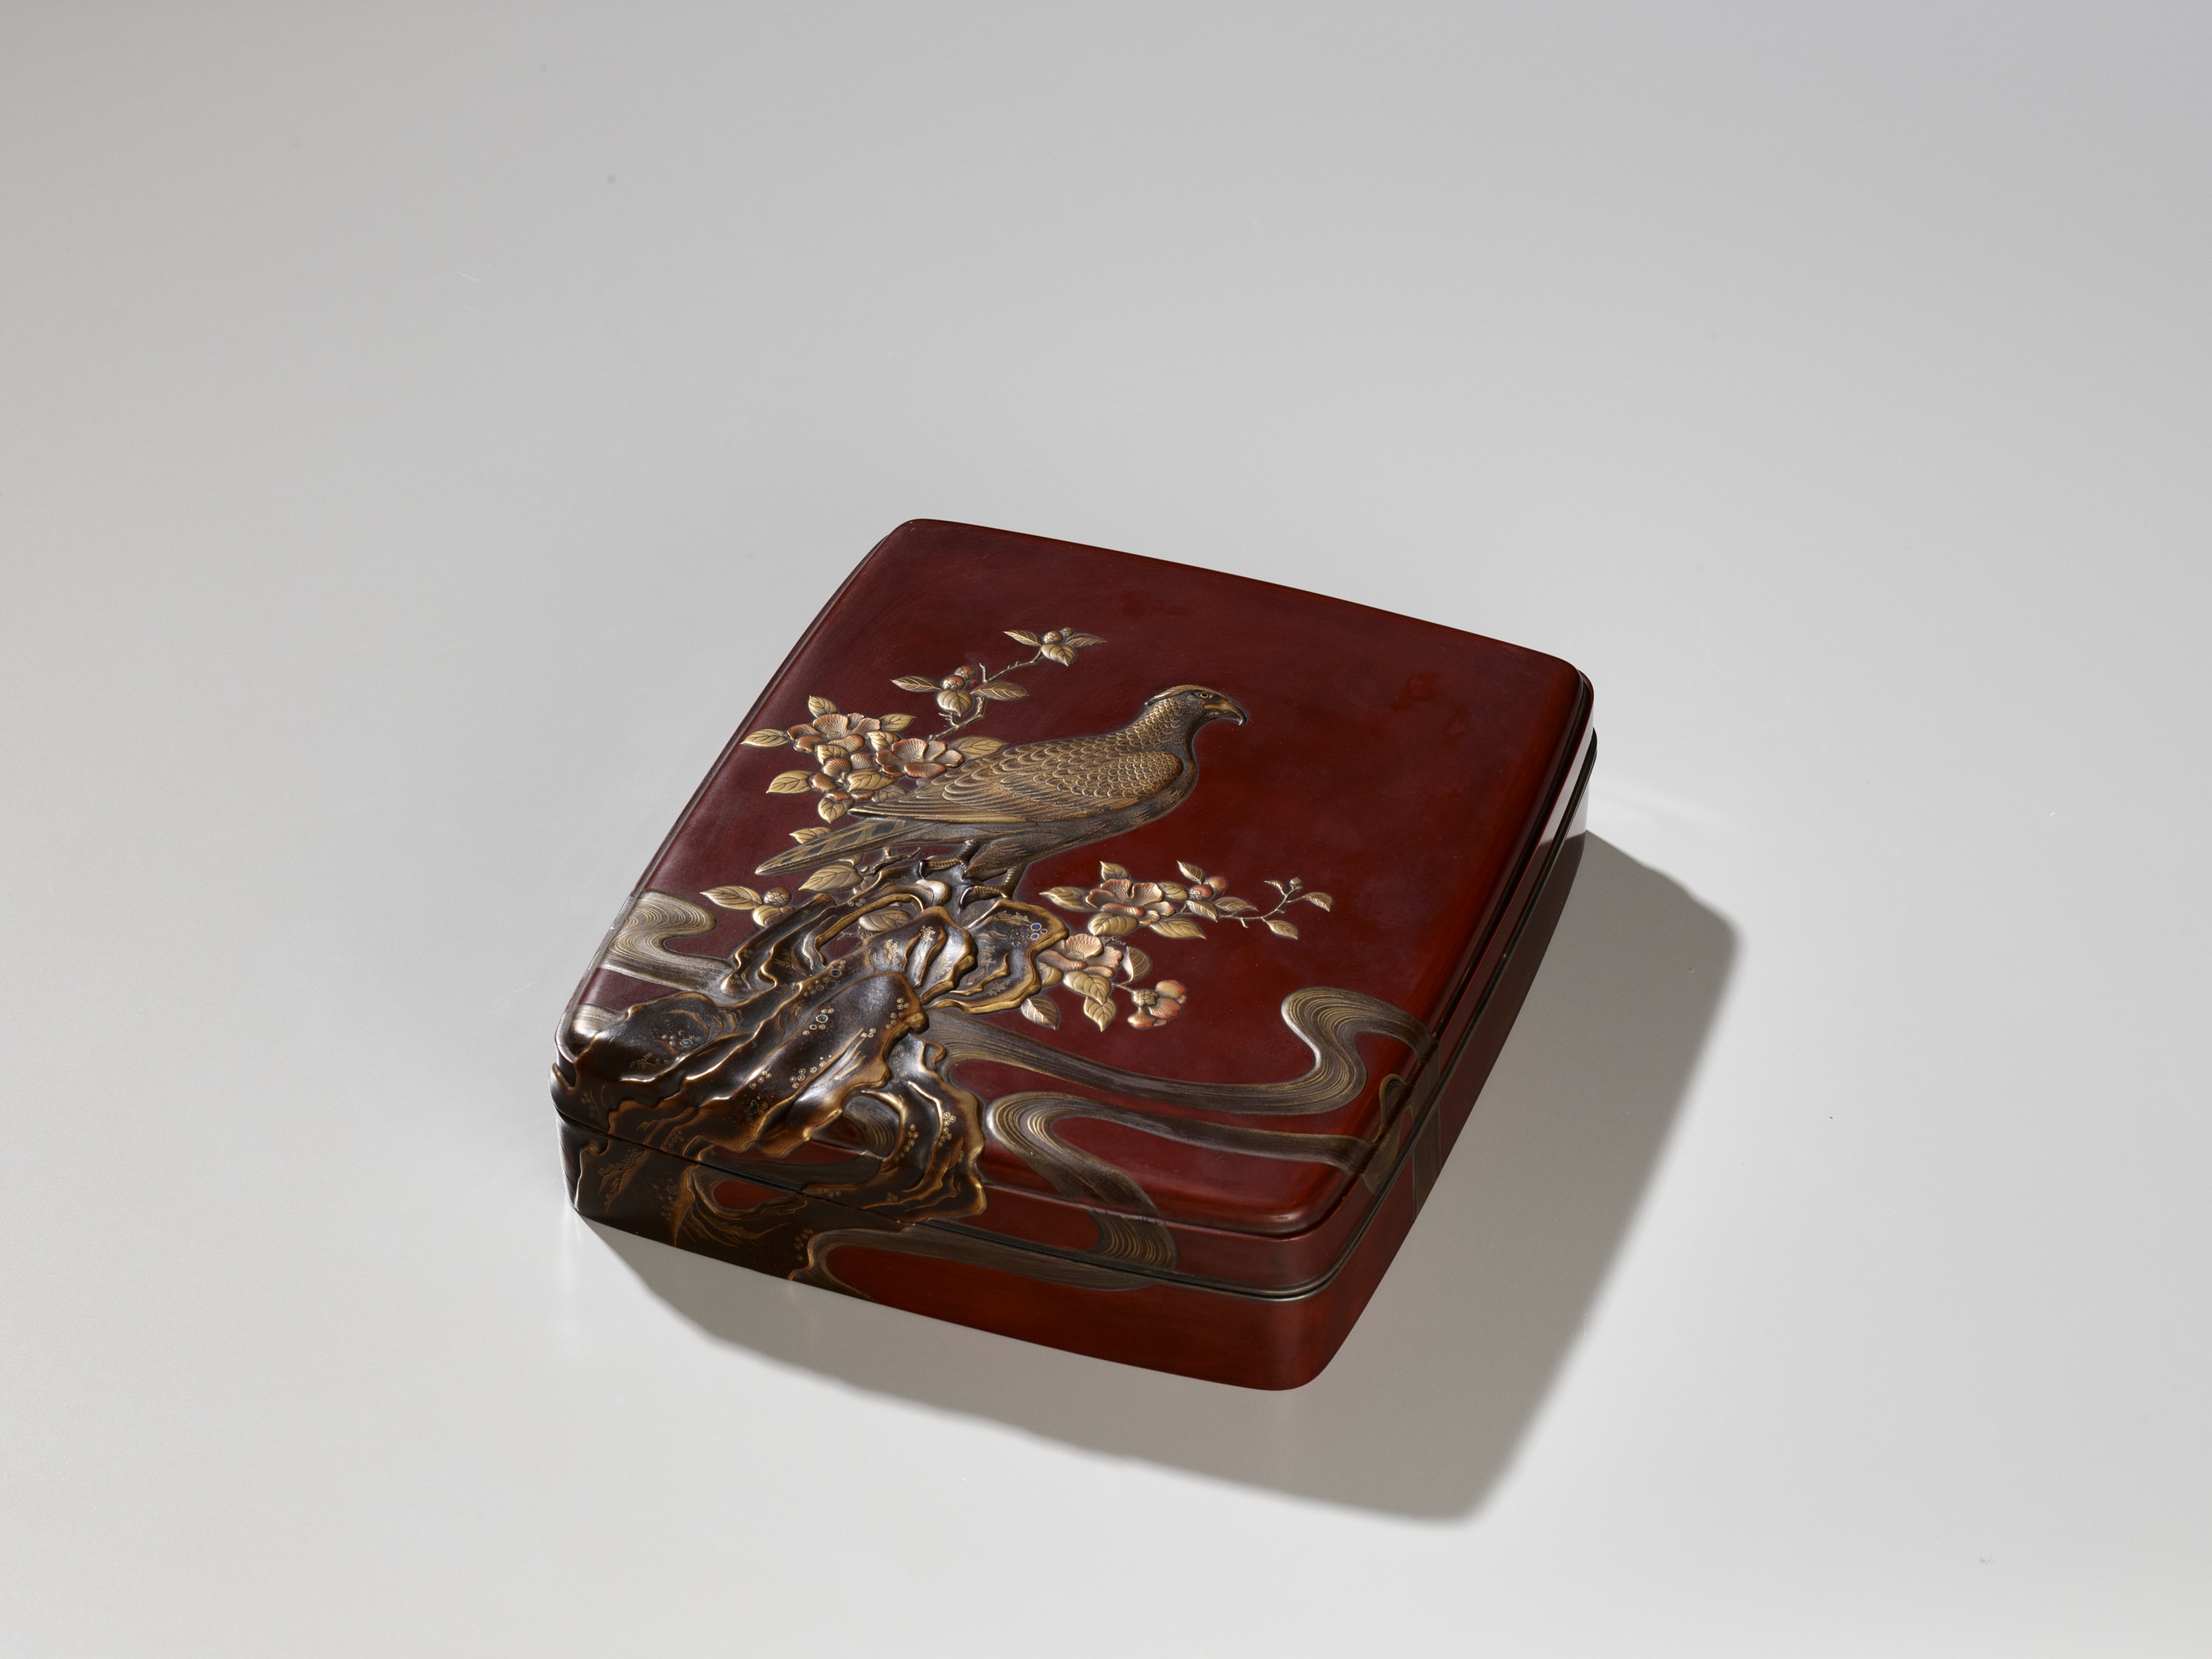 SHOGAKU: A SUPERB LACQUER SUZURIBAKO DEPICTING AN AUTUMNAL SCENE WITH FALCON AND SPARROWS - Image 11 of 14